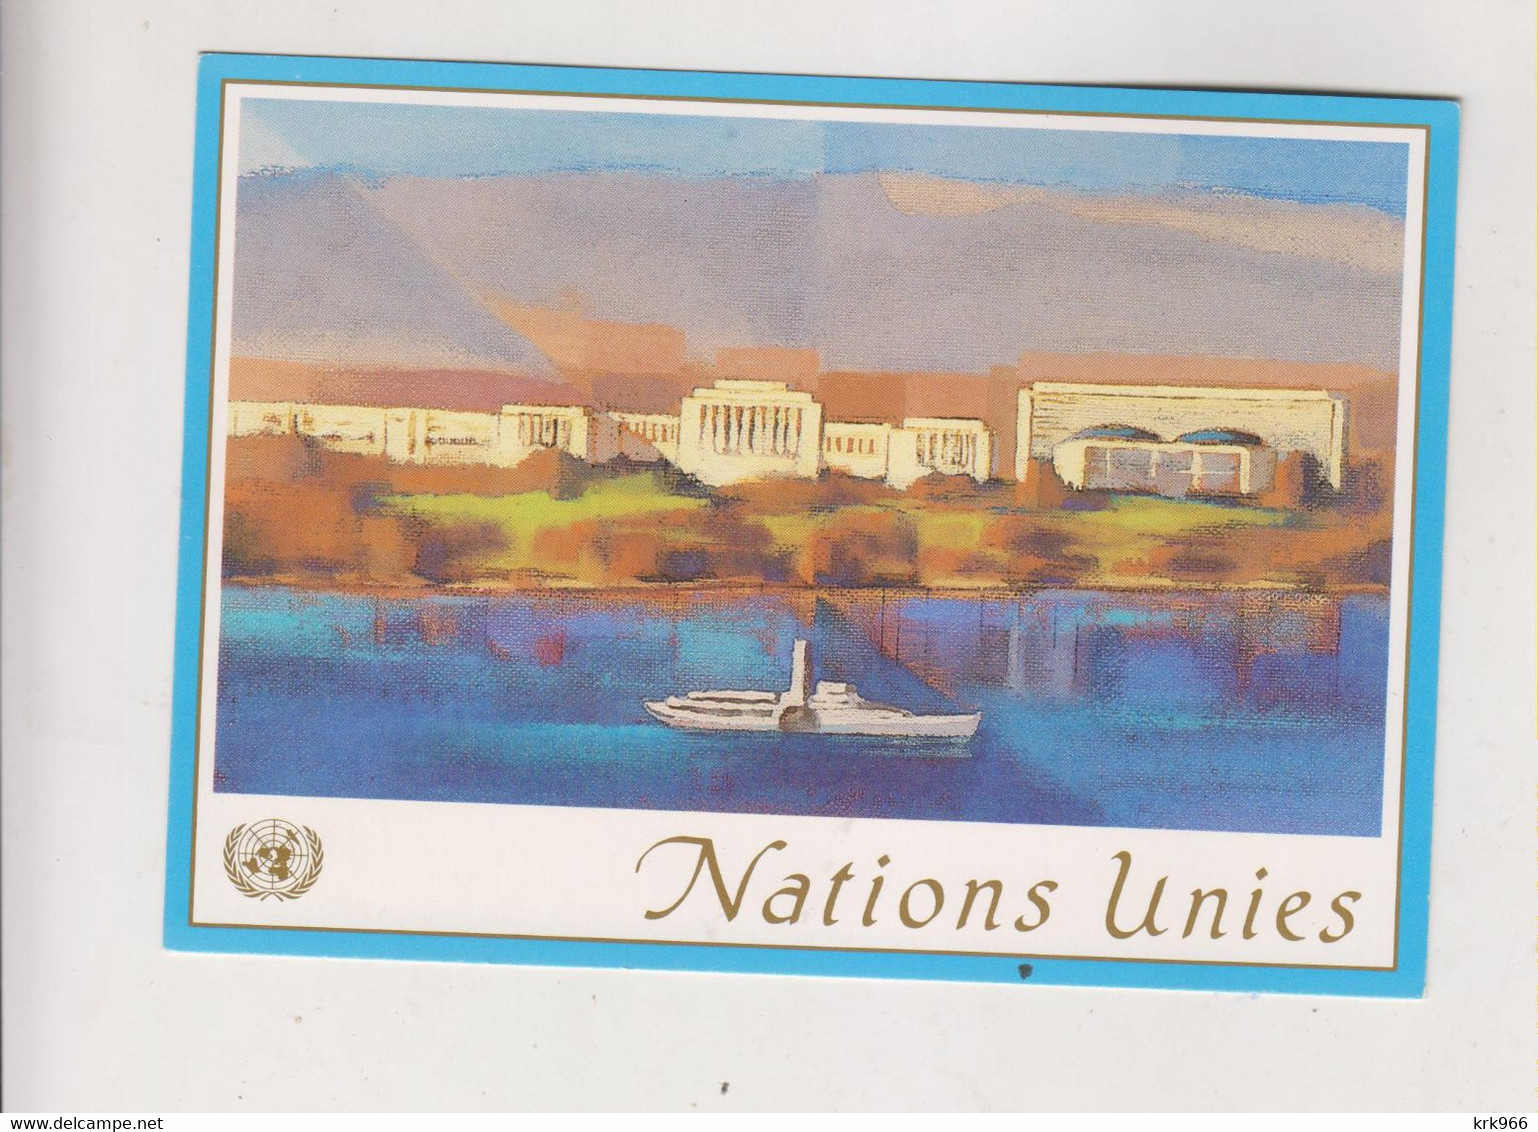 UNITED NATIONS GENEVE 2008 Nice Postcard (part Of Parcel) Used With 2 X 10 Fr Value To Austria - Lettres & Documents